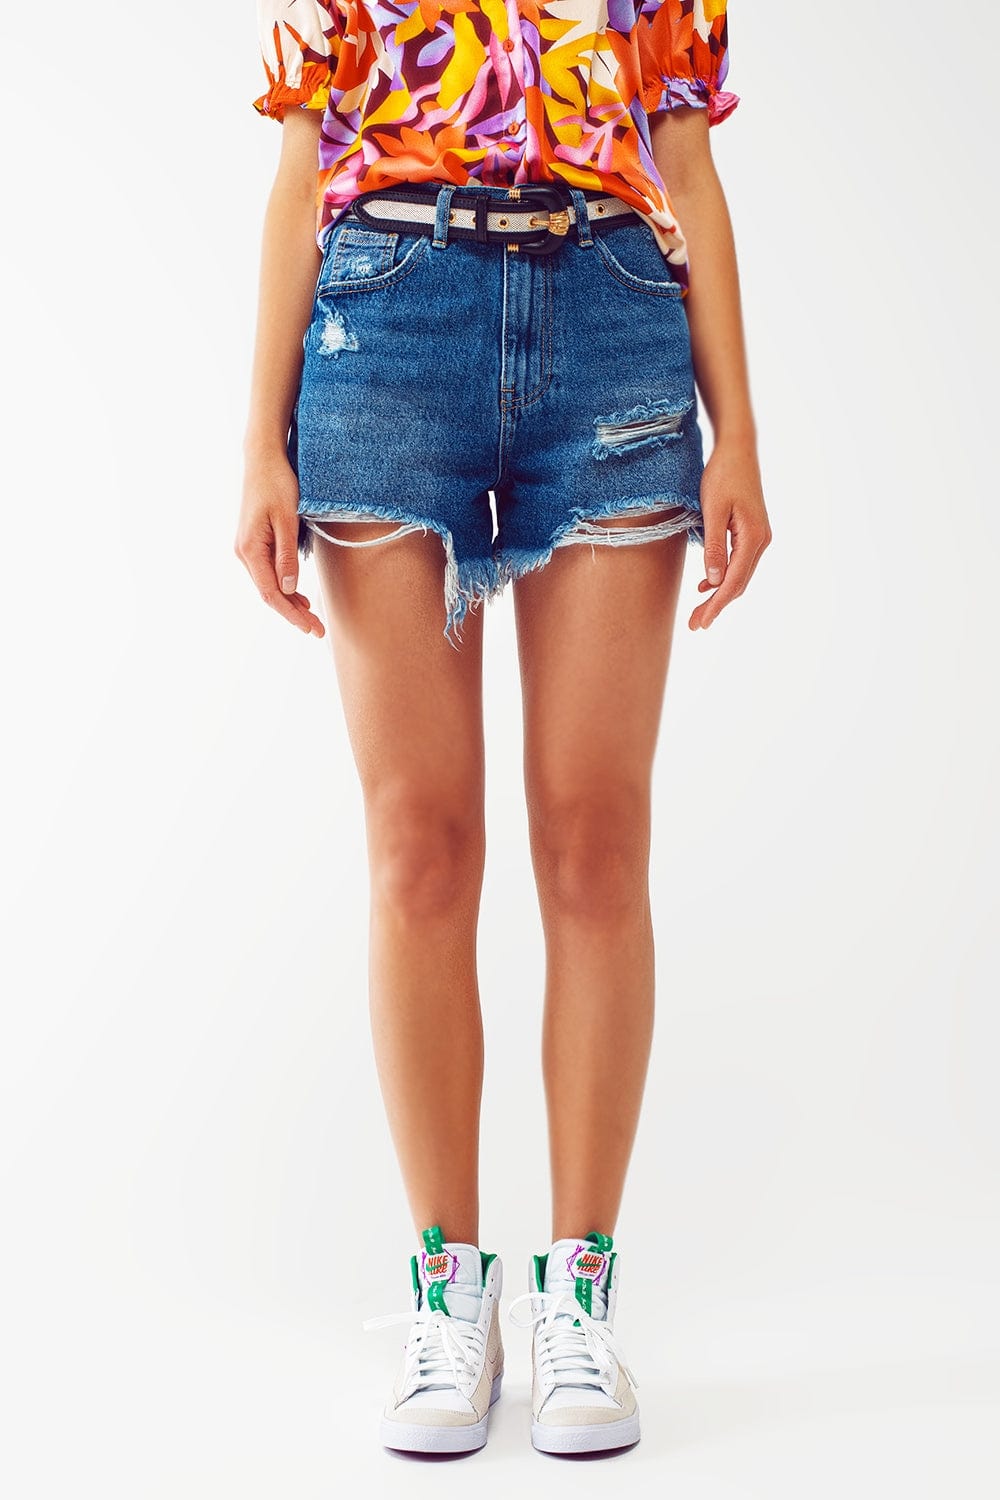 Q2 Women's Shorts Short Distressed Jeans in Mid Wash